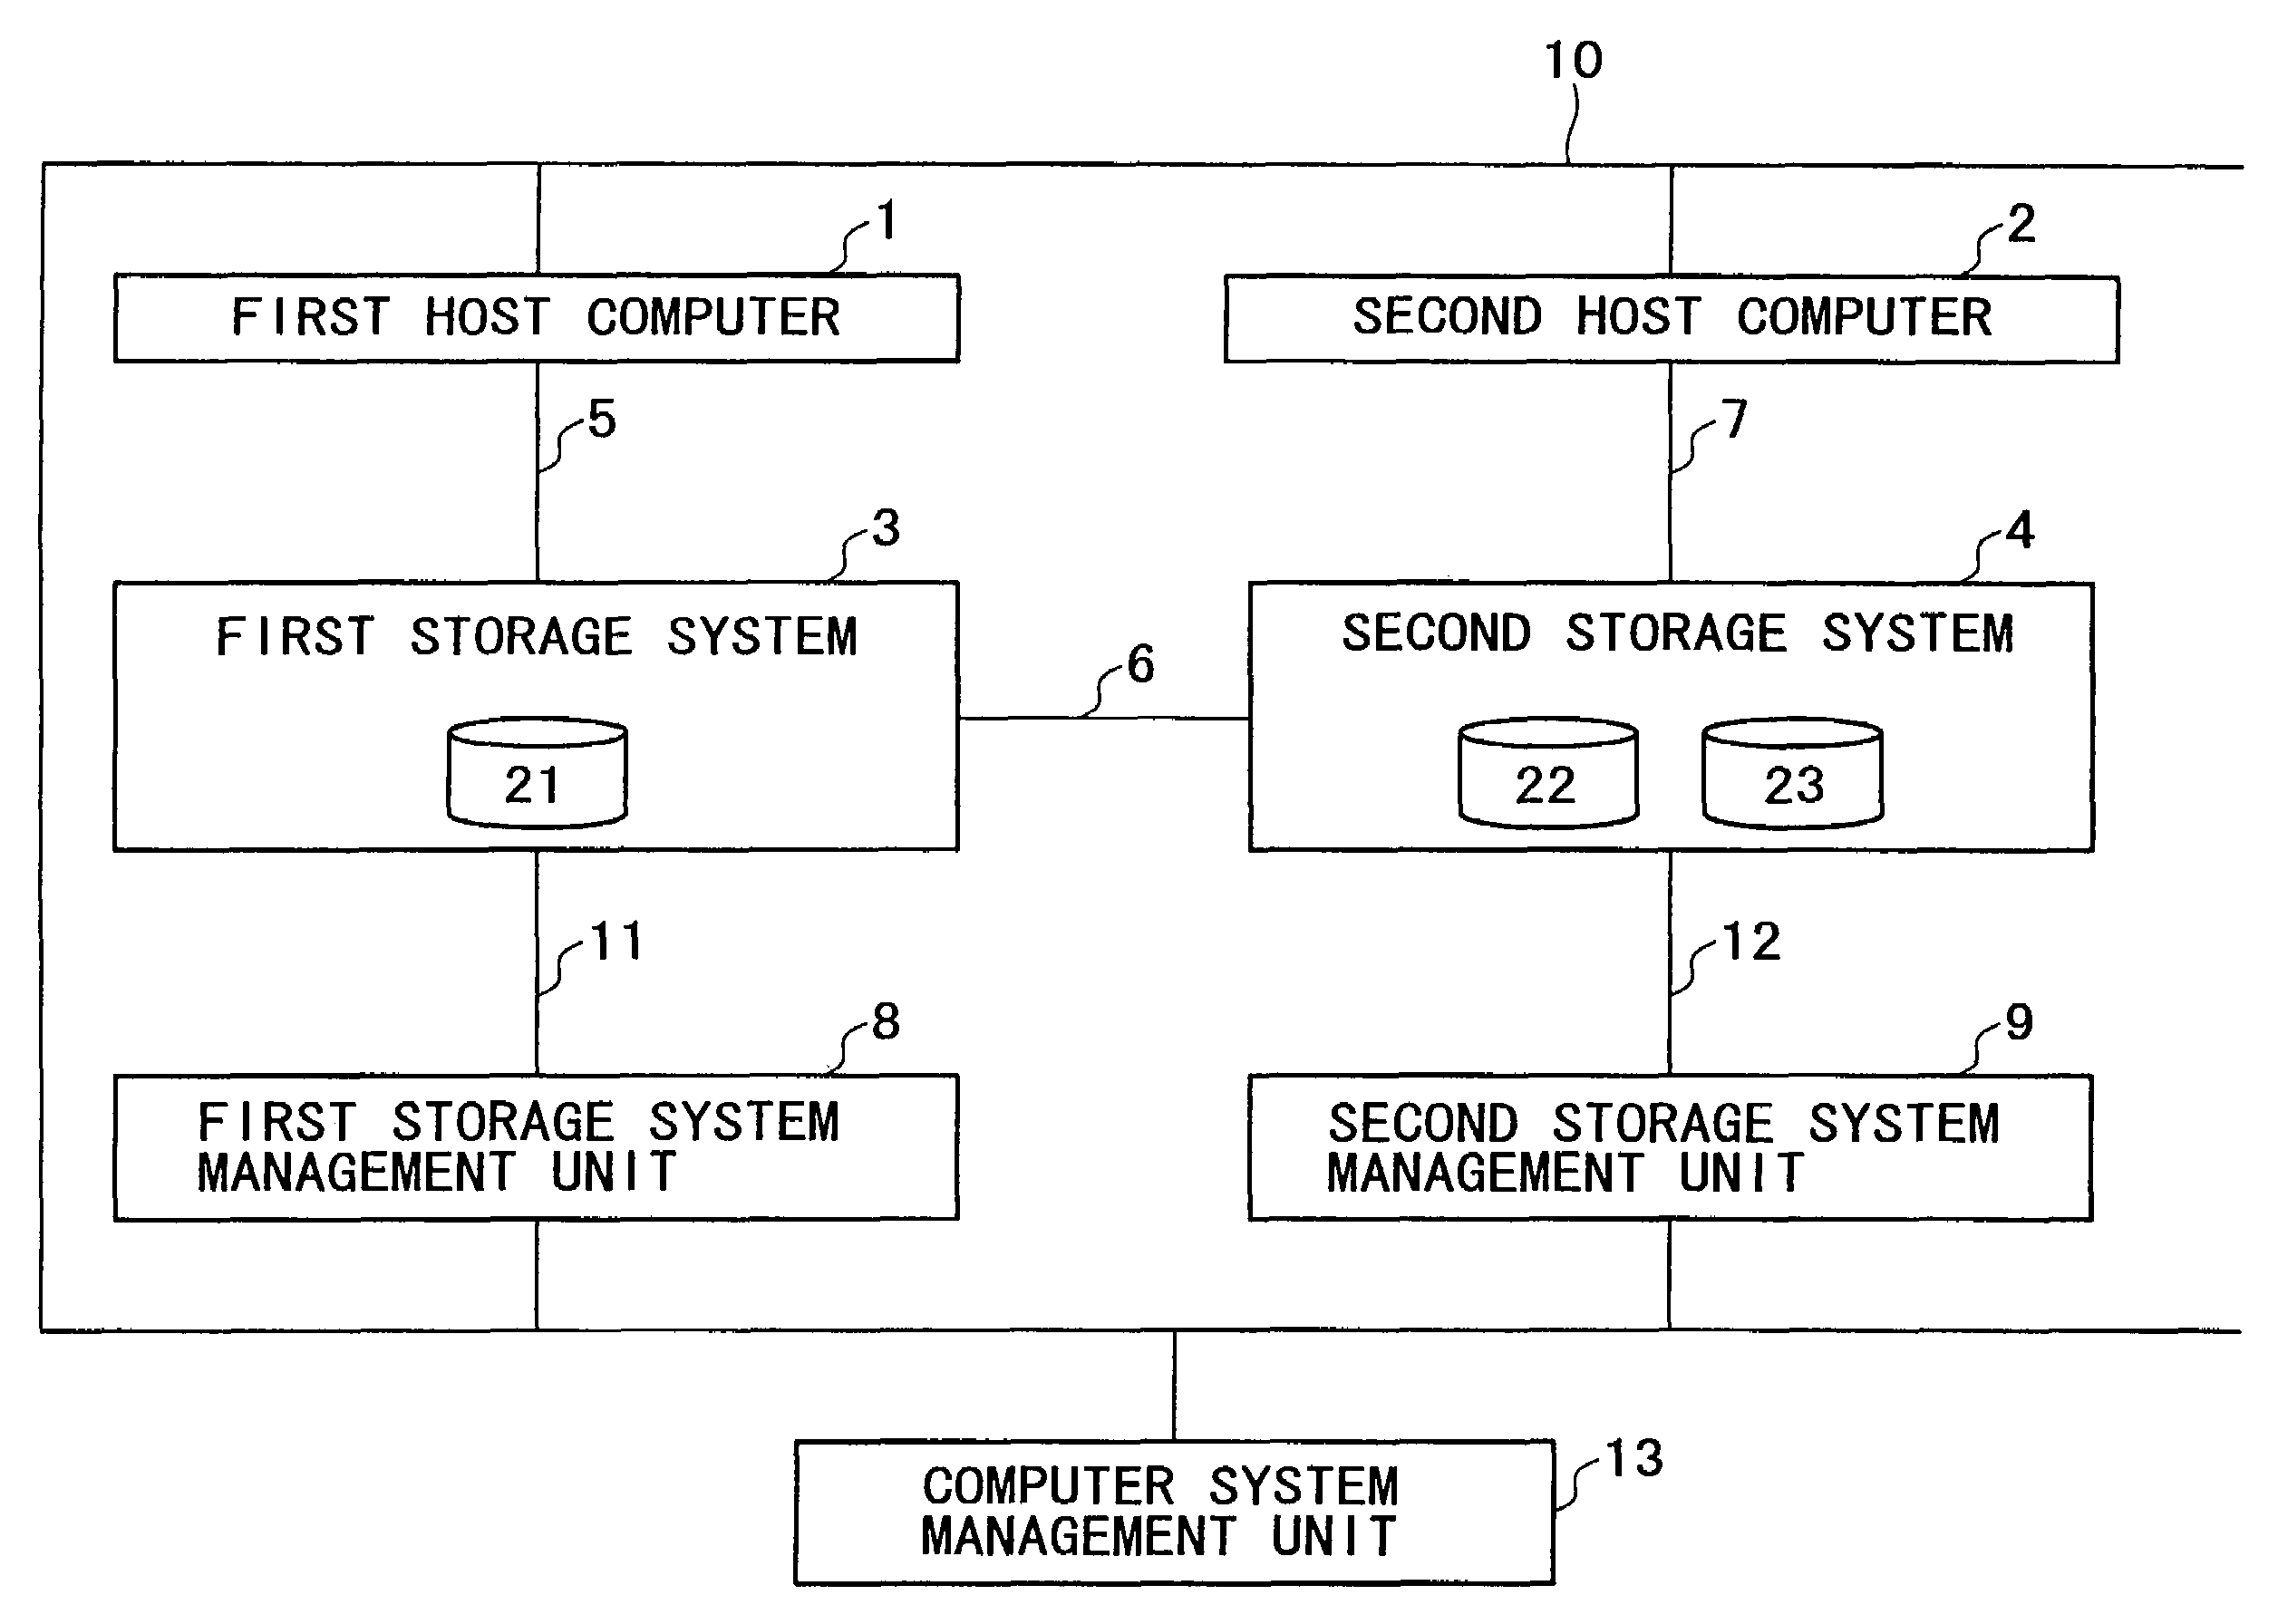 Backup copying and restoration processing in a storage subsystem